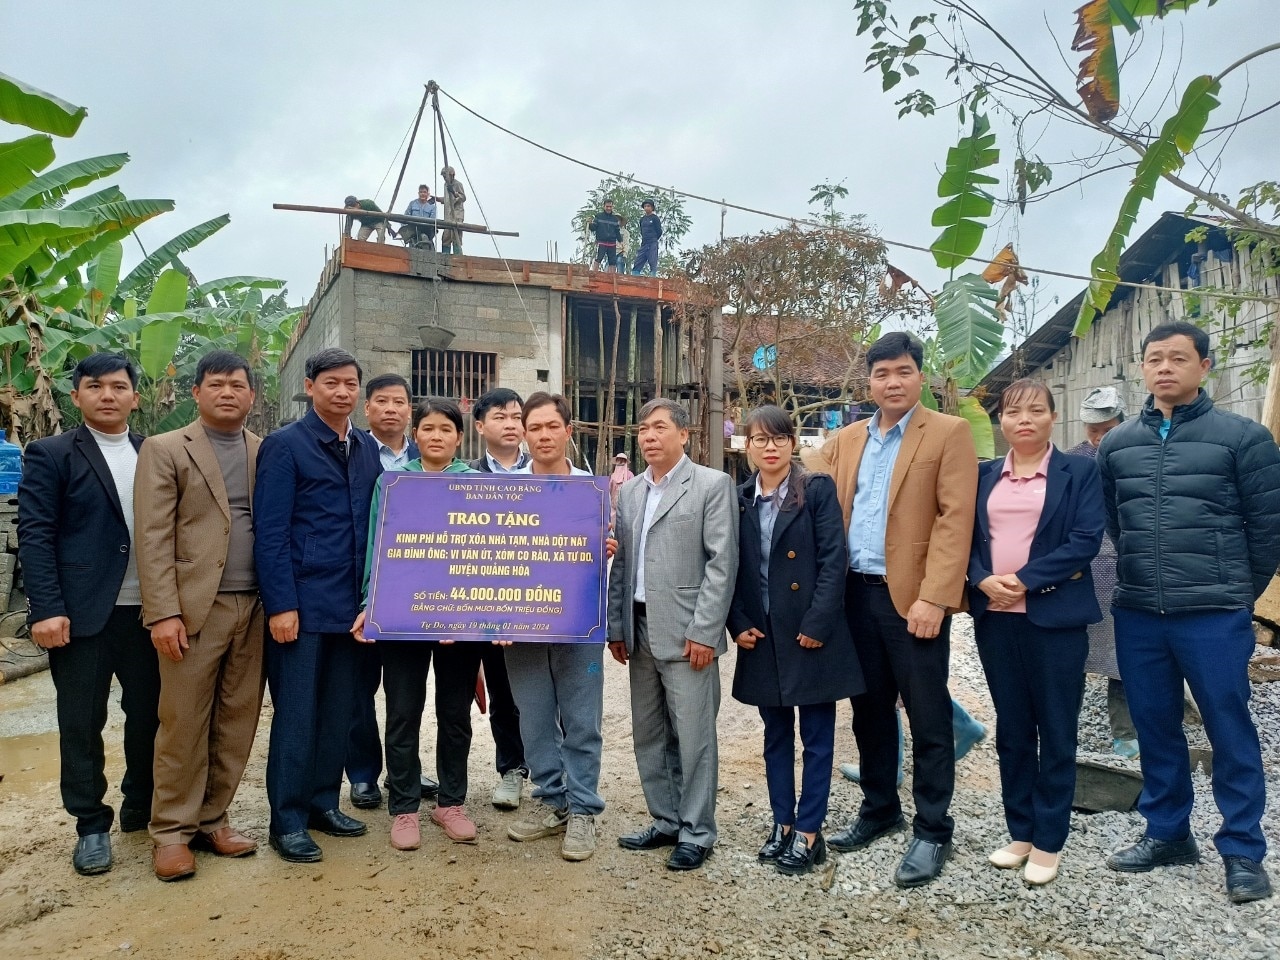 Cao Bang Ethnic Committee awarded funds to support the removal of temporary and dilapidated houses for poor households in Tu Do commune, Quang Hoa district